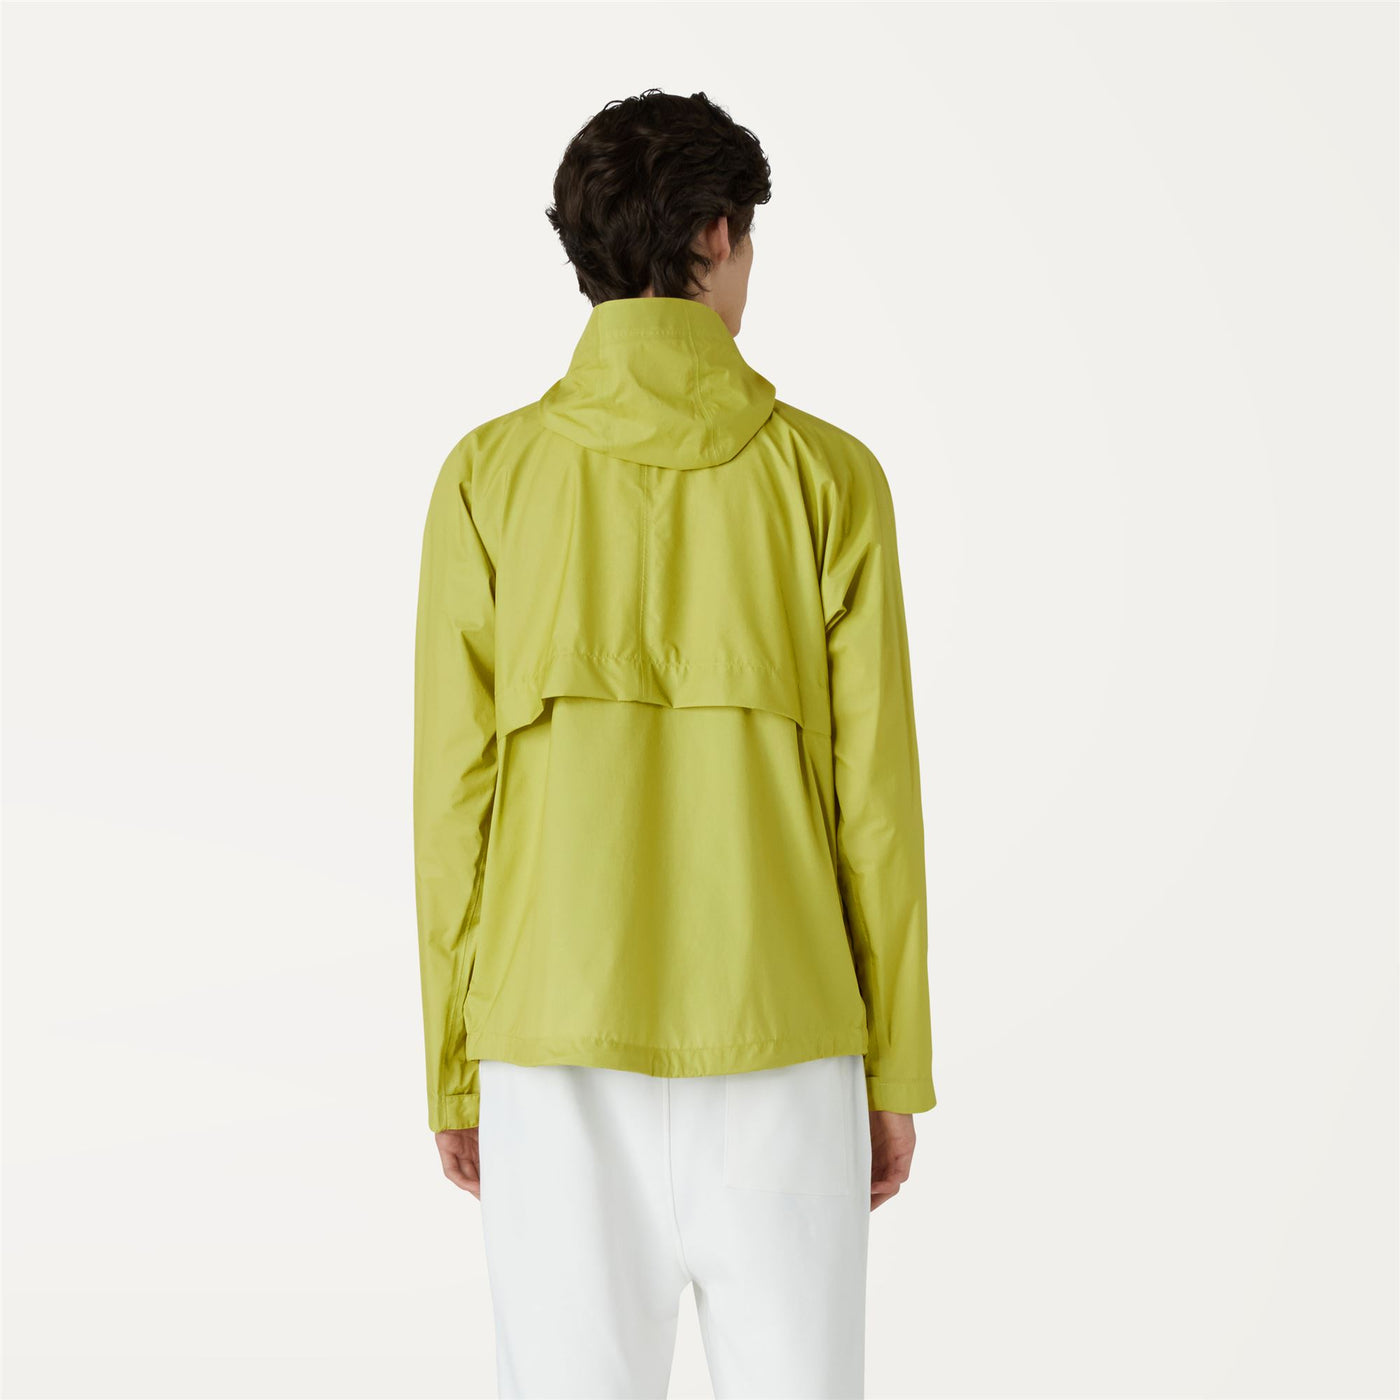 Jackets Man TANCREDE N3L Mid YELLOW LEMON Dressed Front Double		